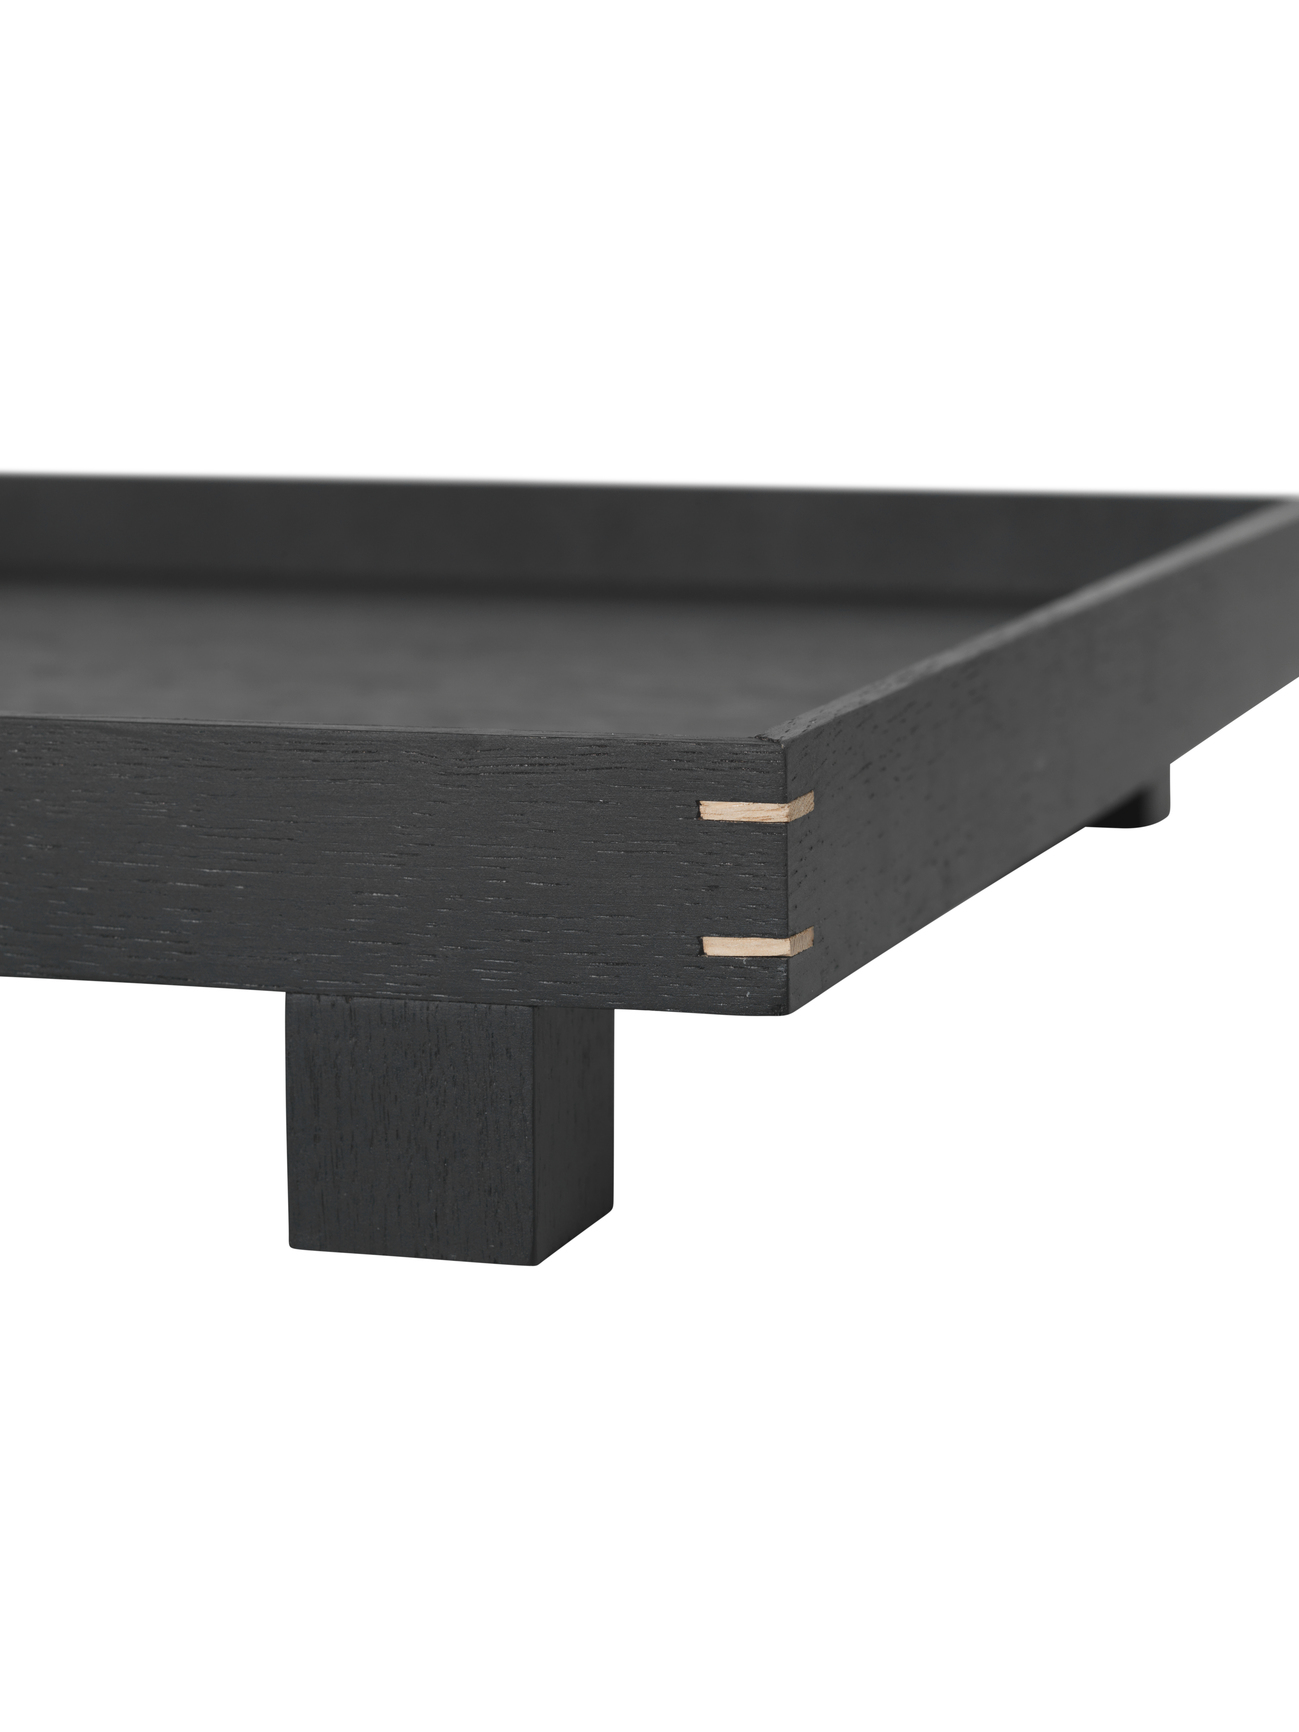 Bon wooden tray small black stained oak